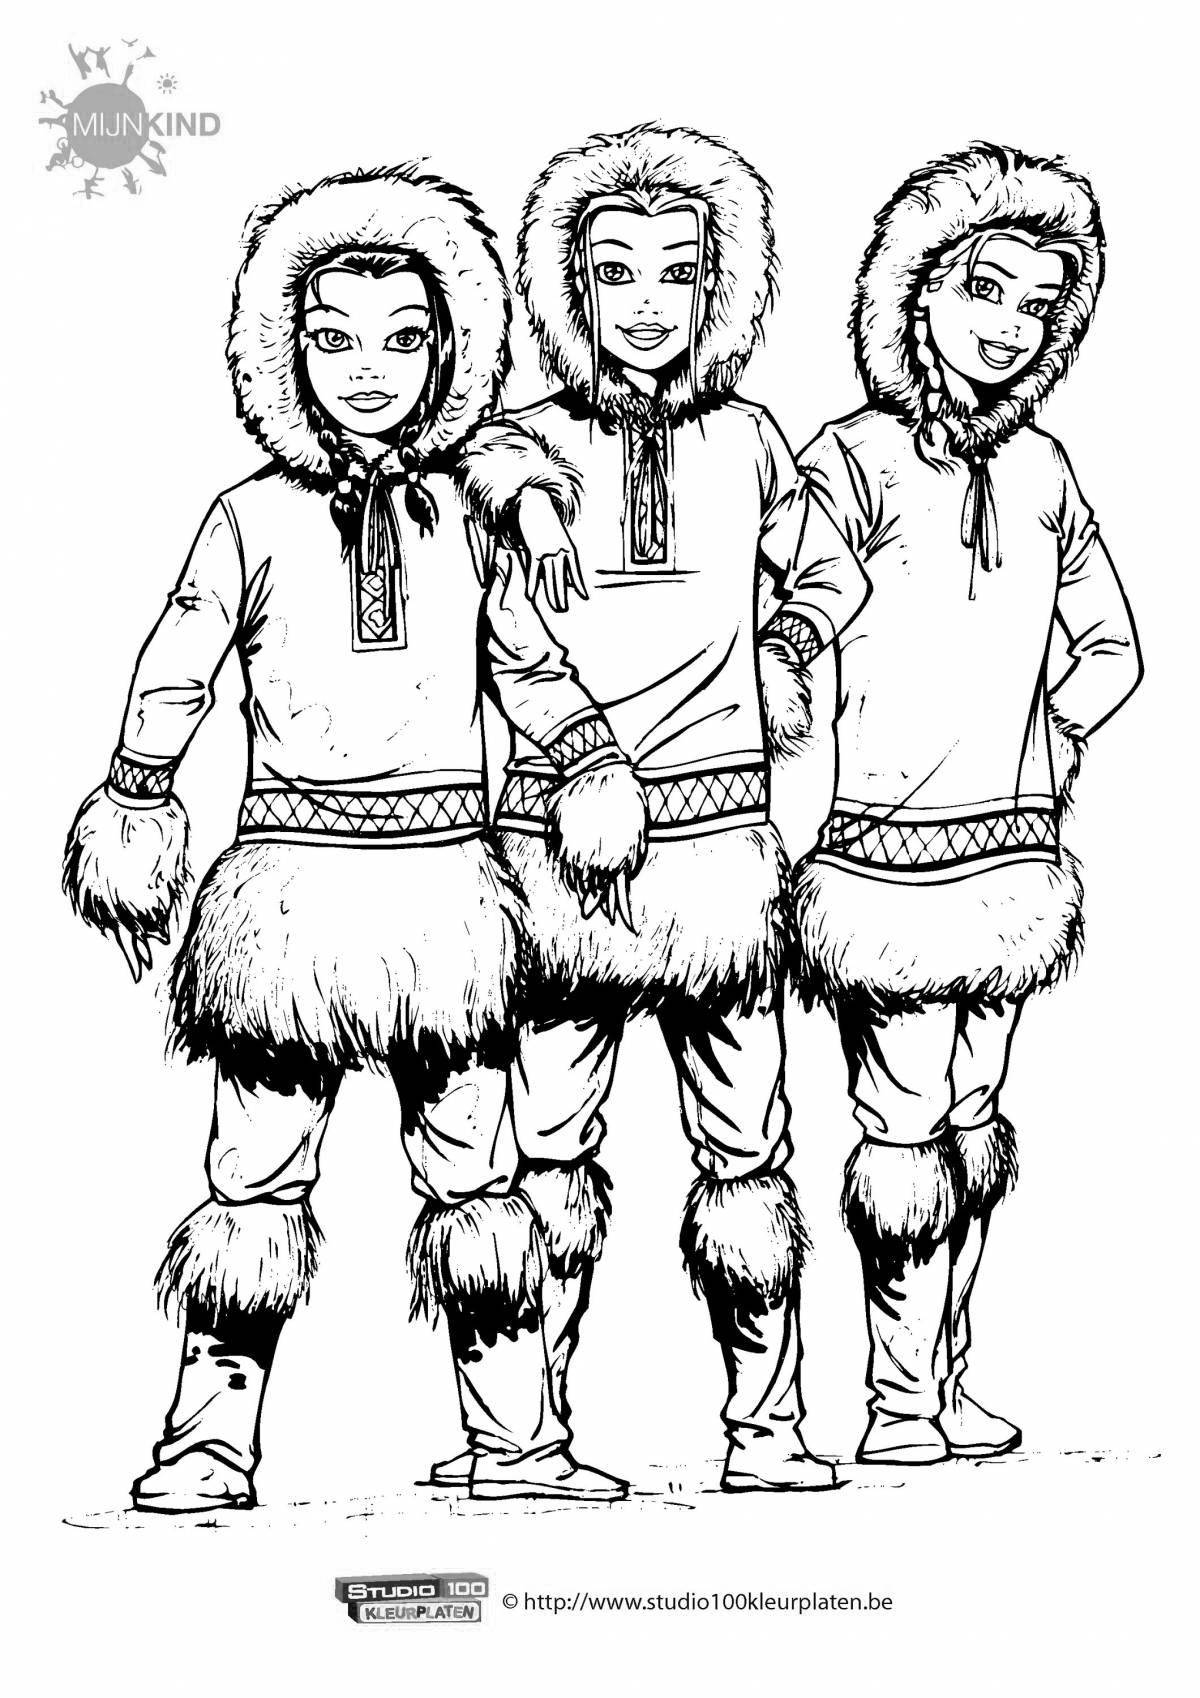 Shiny coloring book for children of the north